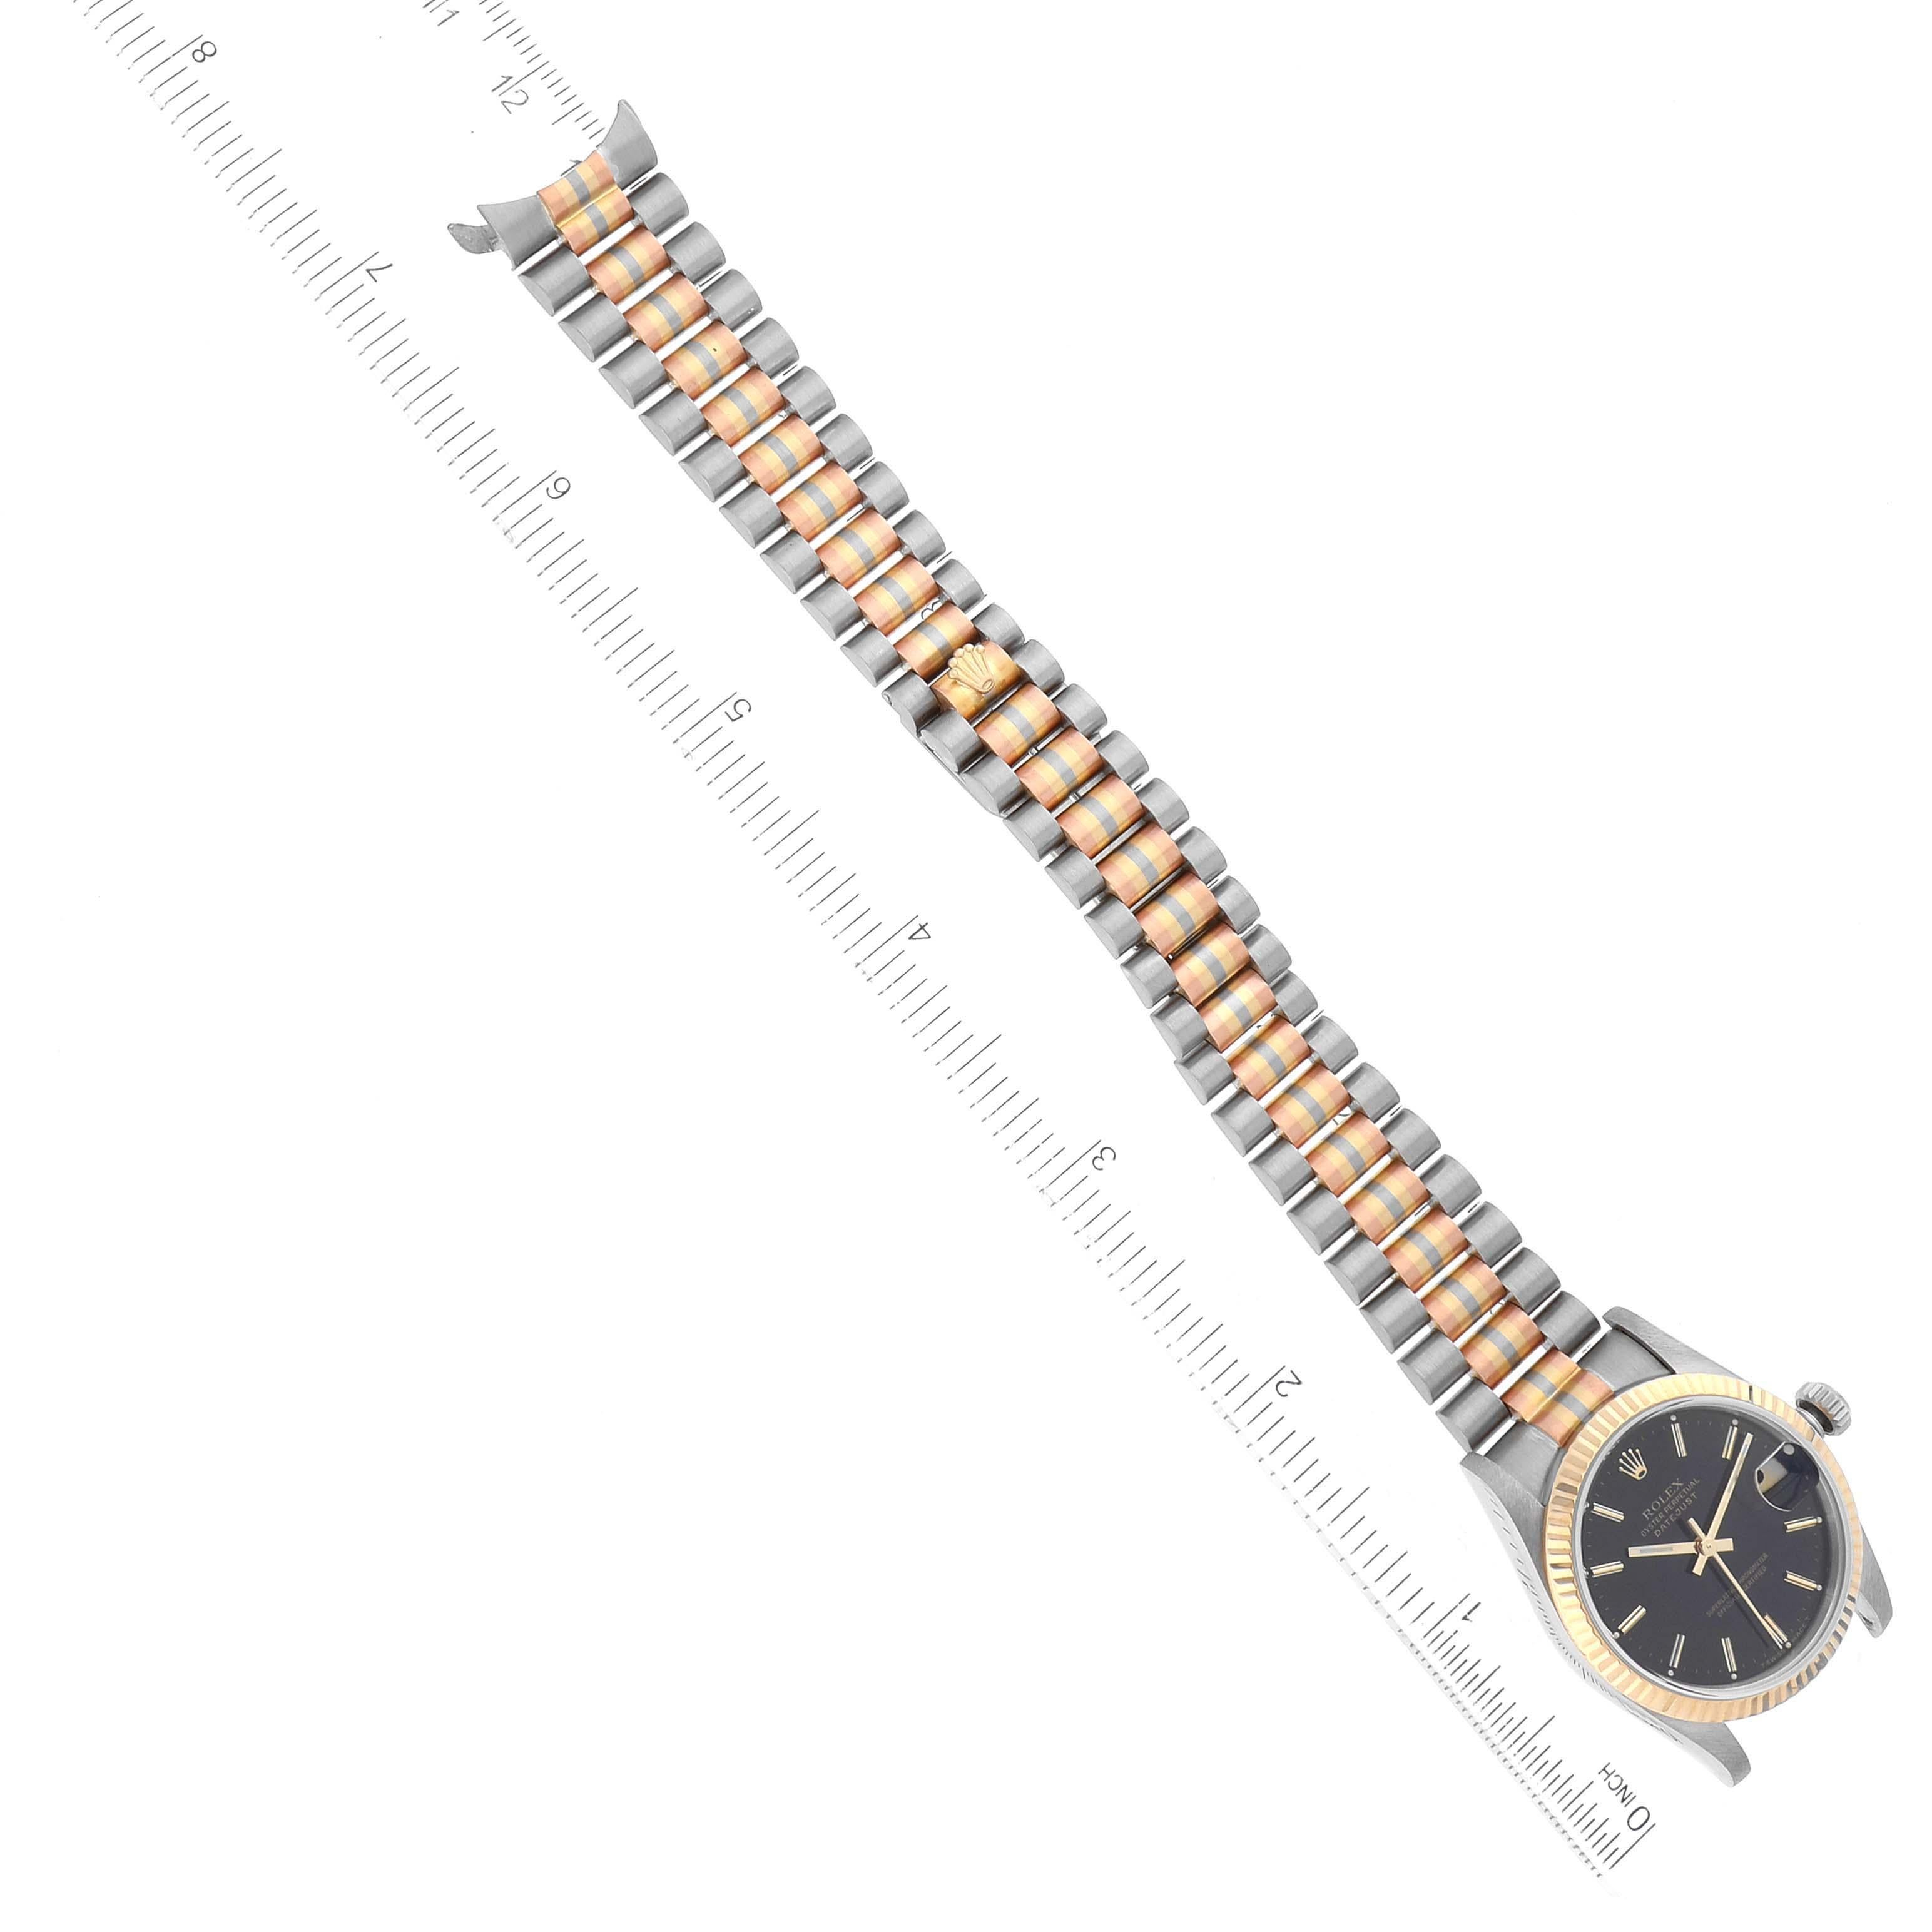 Rolex President Midsize Tridor White Yellow Rose Gold Ladies Watch 68279. Officially certified chronometer automatic self-winding movement. 18k white gold oyster case 31.0 mm in diameter. Rolex logo on the crown. 18K yellow gold fluted bezel.